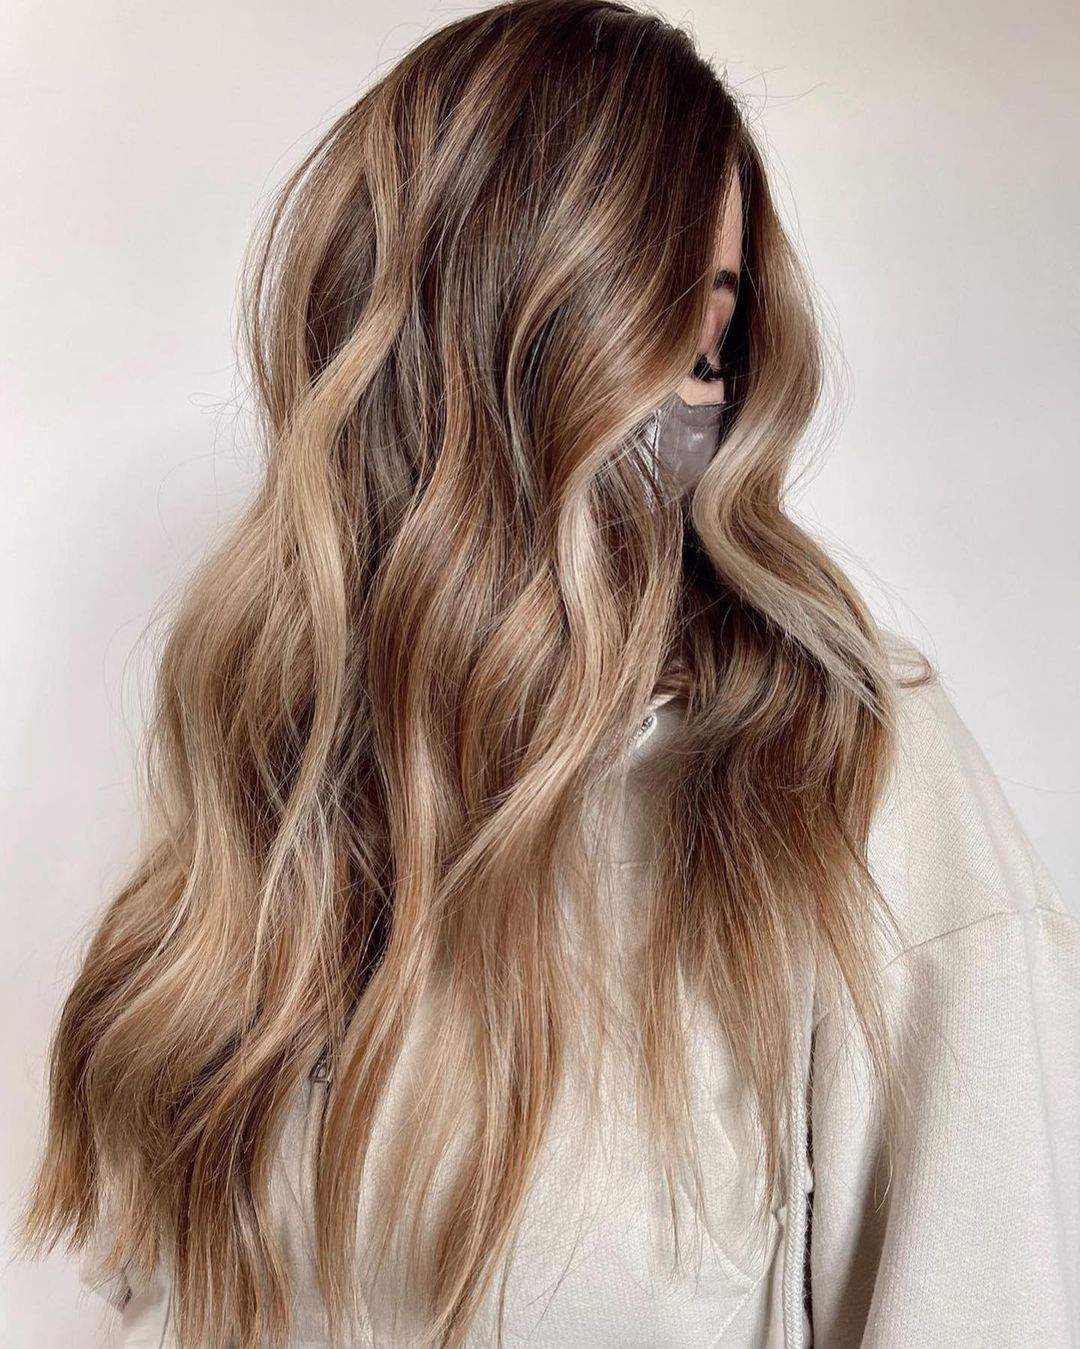 40 Greatest Long Hairstyles For Women With Long Hair In 2021 images 14